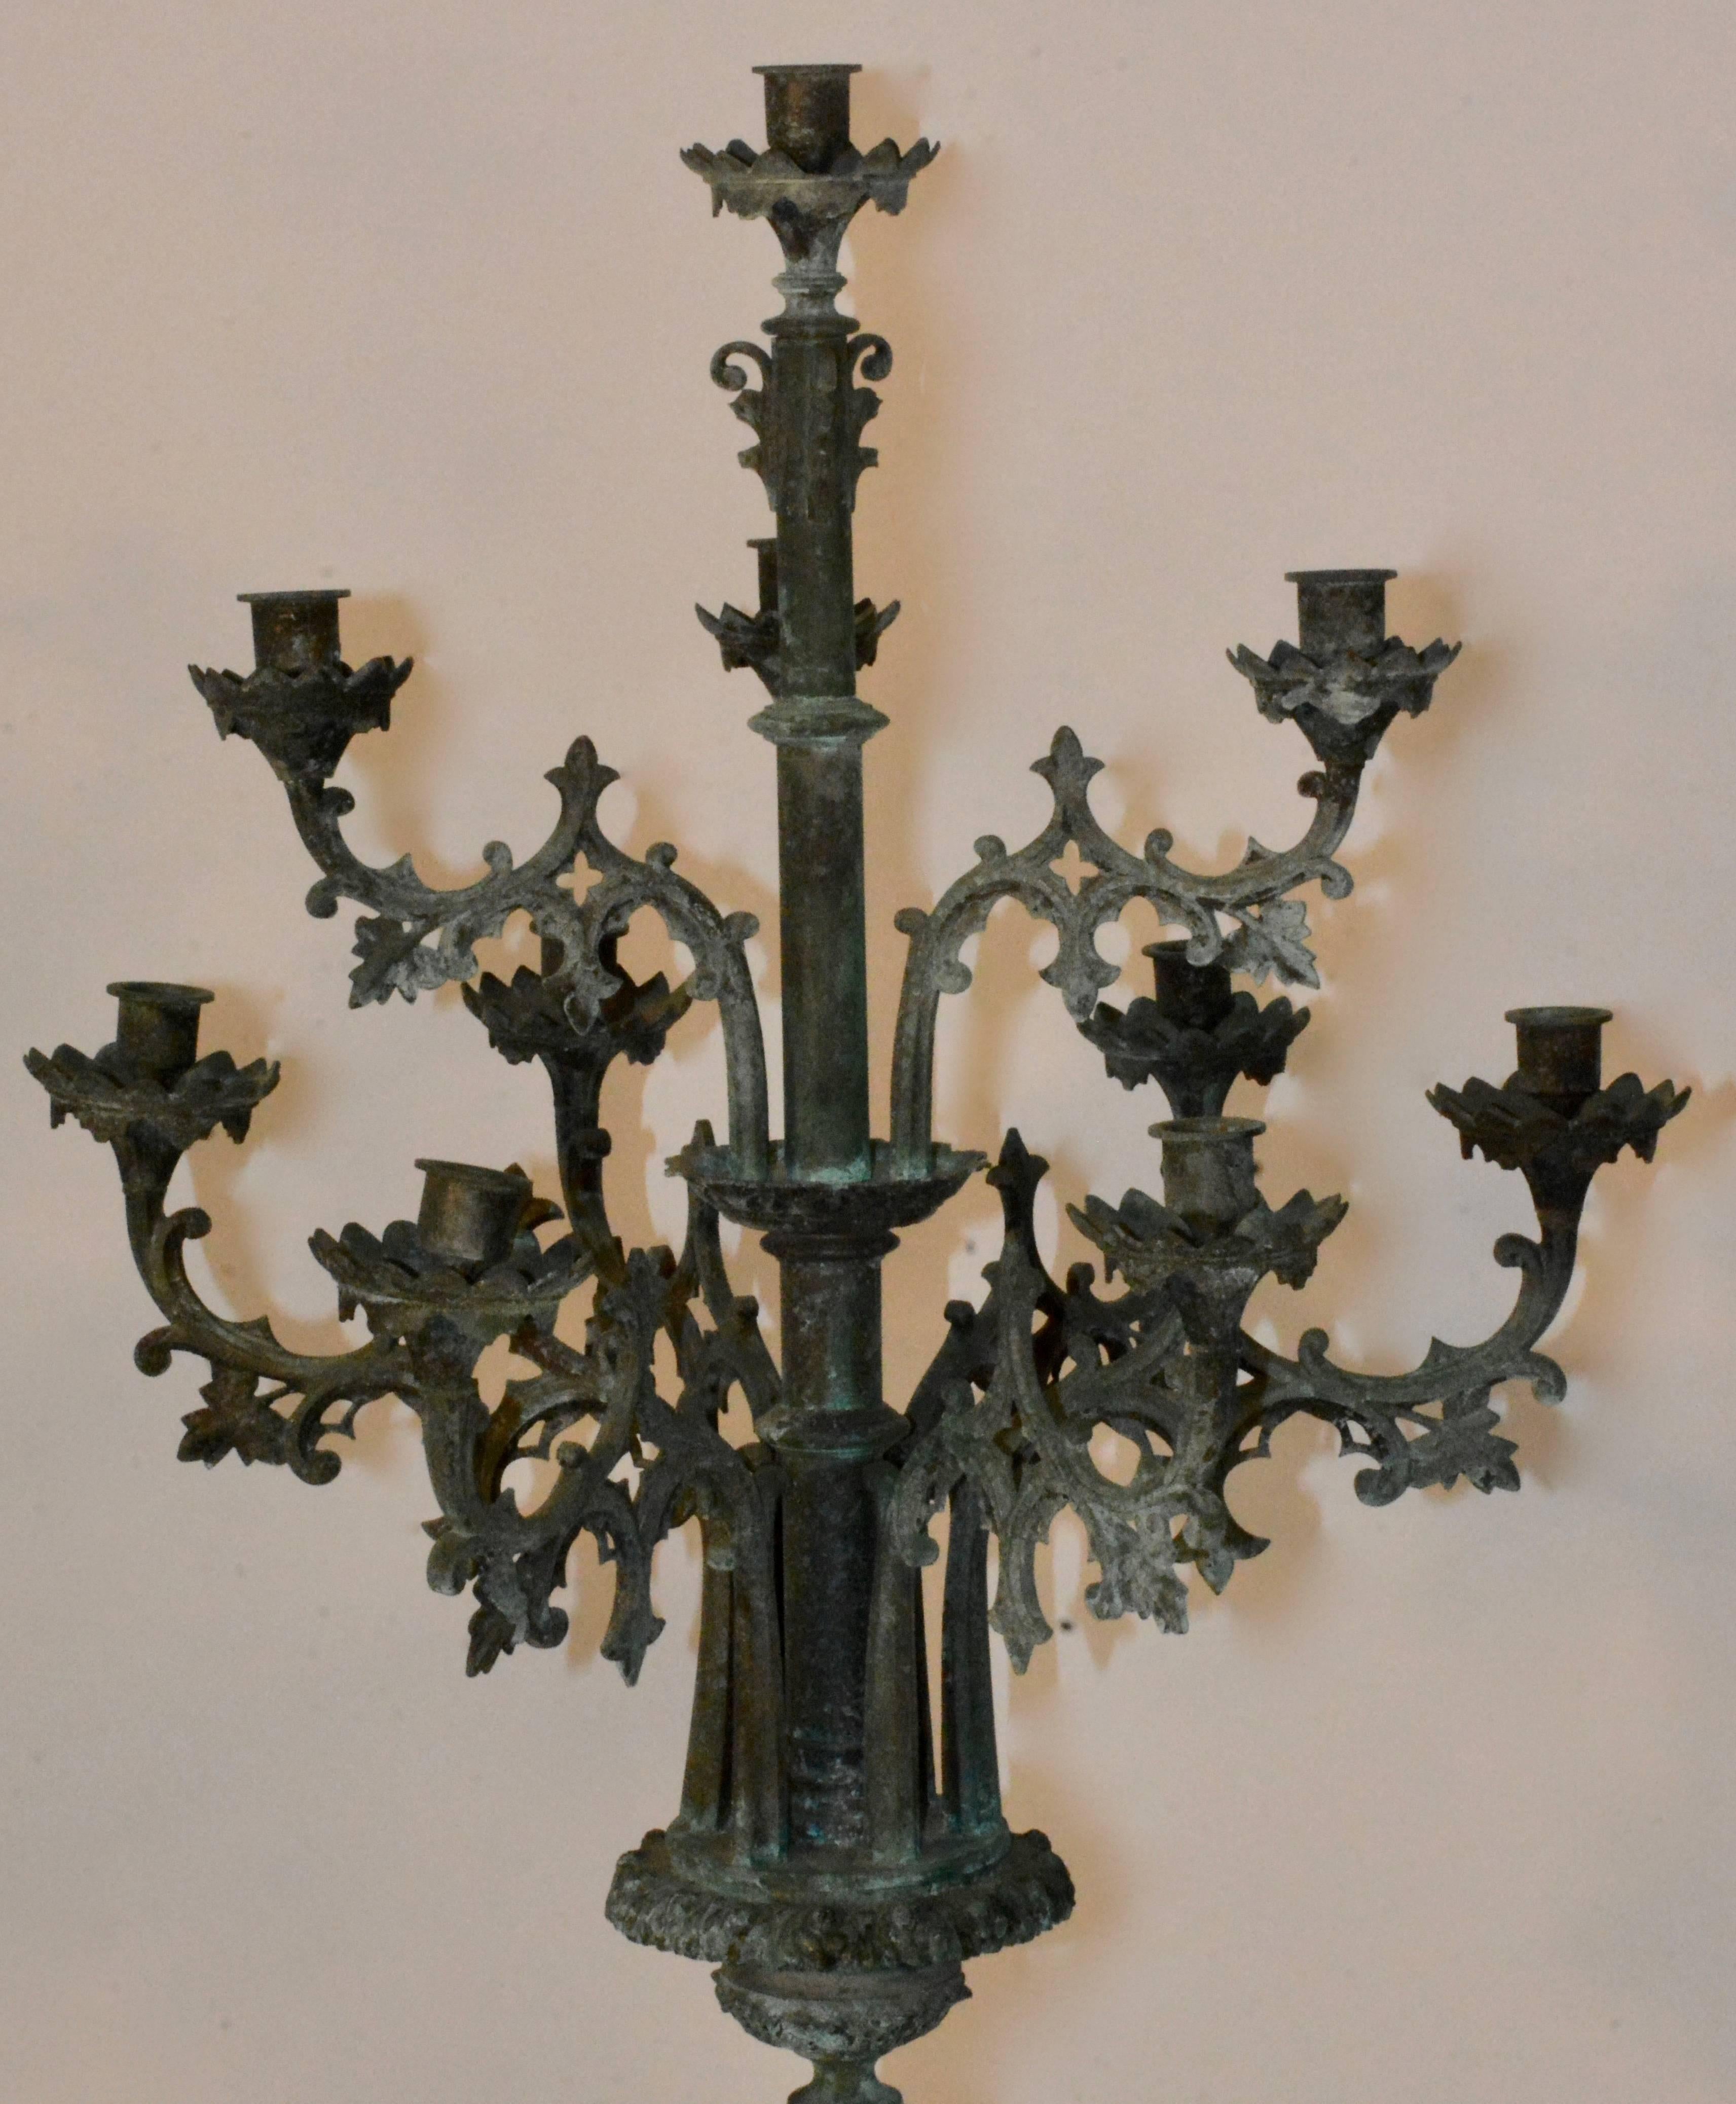 Featured is a stunning pair of 19th century French bronze standing candelabras. These gorgeous patinated bronze candelabras stand on a beautiful bases. Both have ten scrolled arms with intricate detailing and cut-outs.